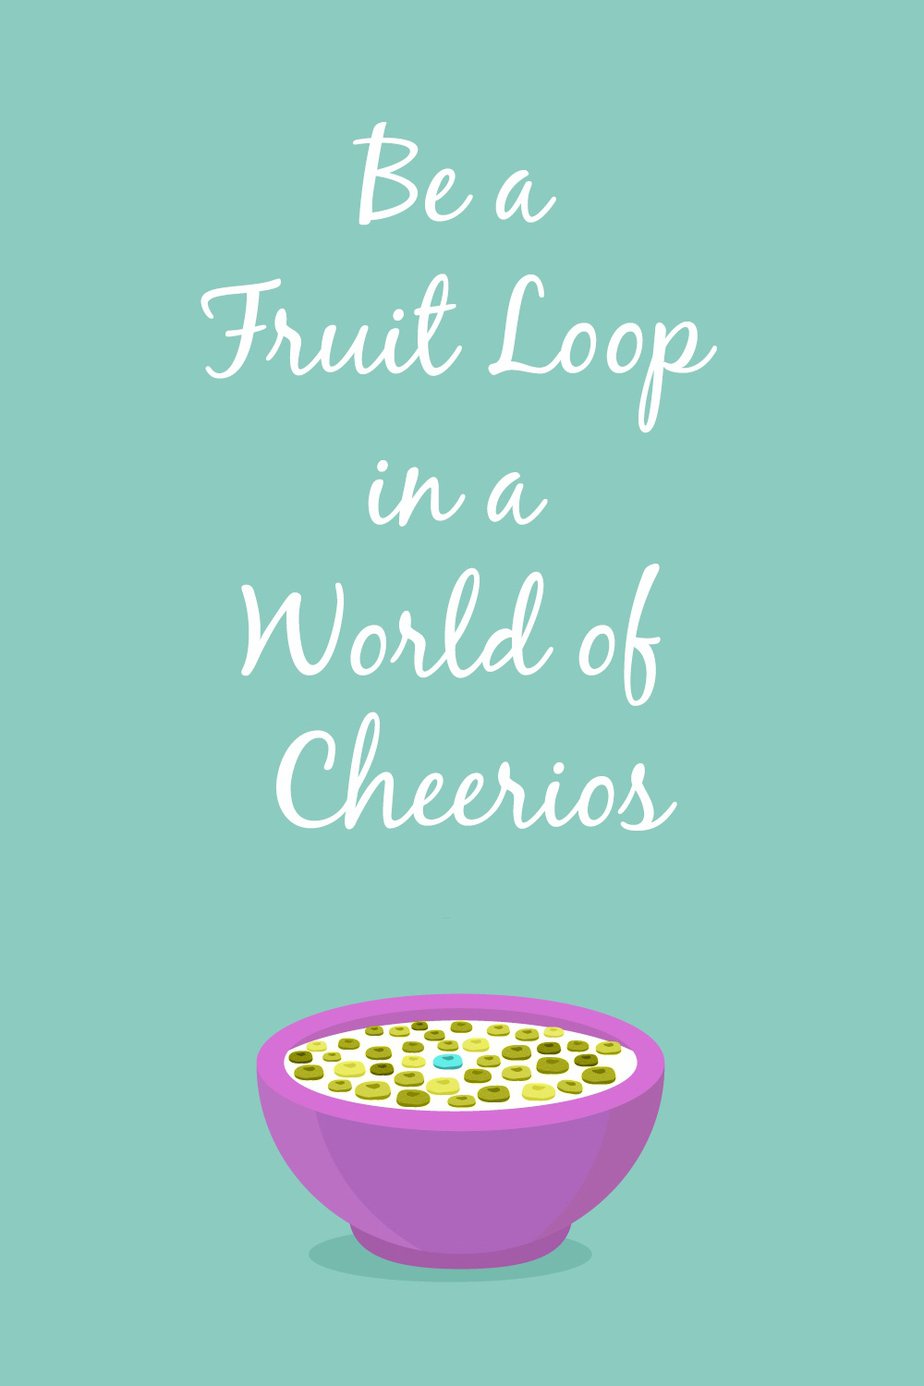 What does it mean to you to be a fruit loop in a world of Cheerios? Find ways to be a leader and stand out from the crowd. Quotes About Fitting in and Standing Out | Stand Out From The Crowd | Be The One to Stand Out in The Crowd | Be Different Quotes | Quotes About Being Different | Quotes About Standing Alone | Why Fit in